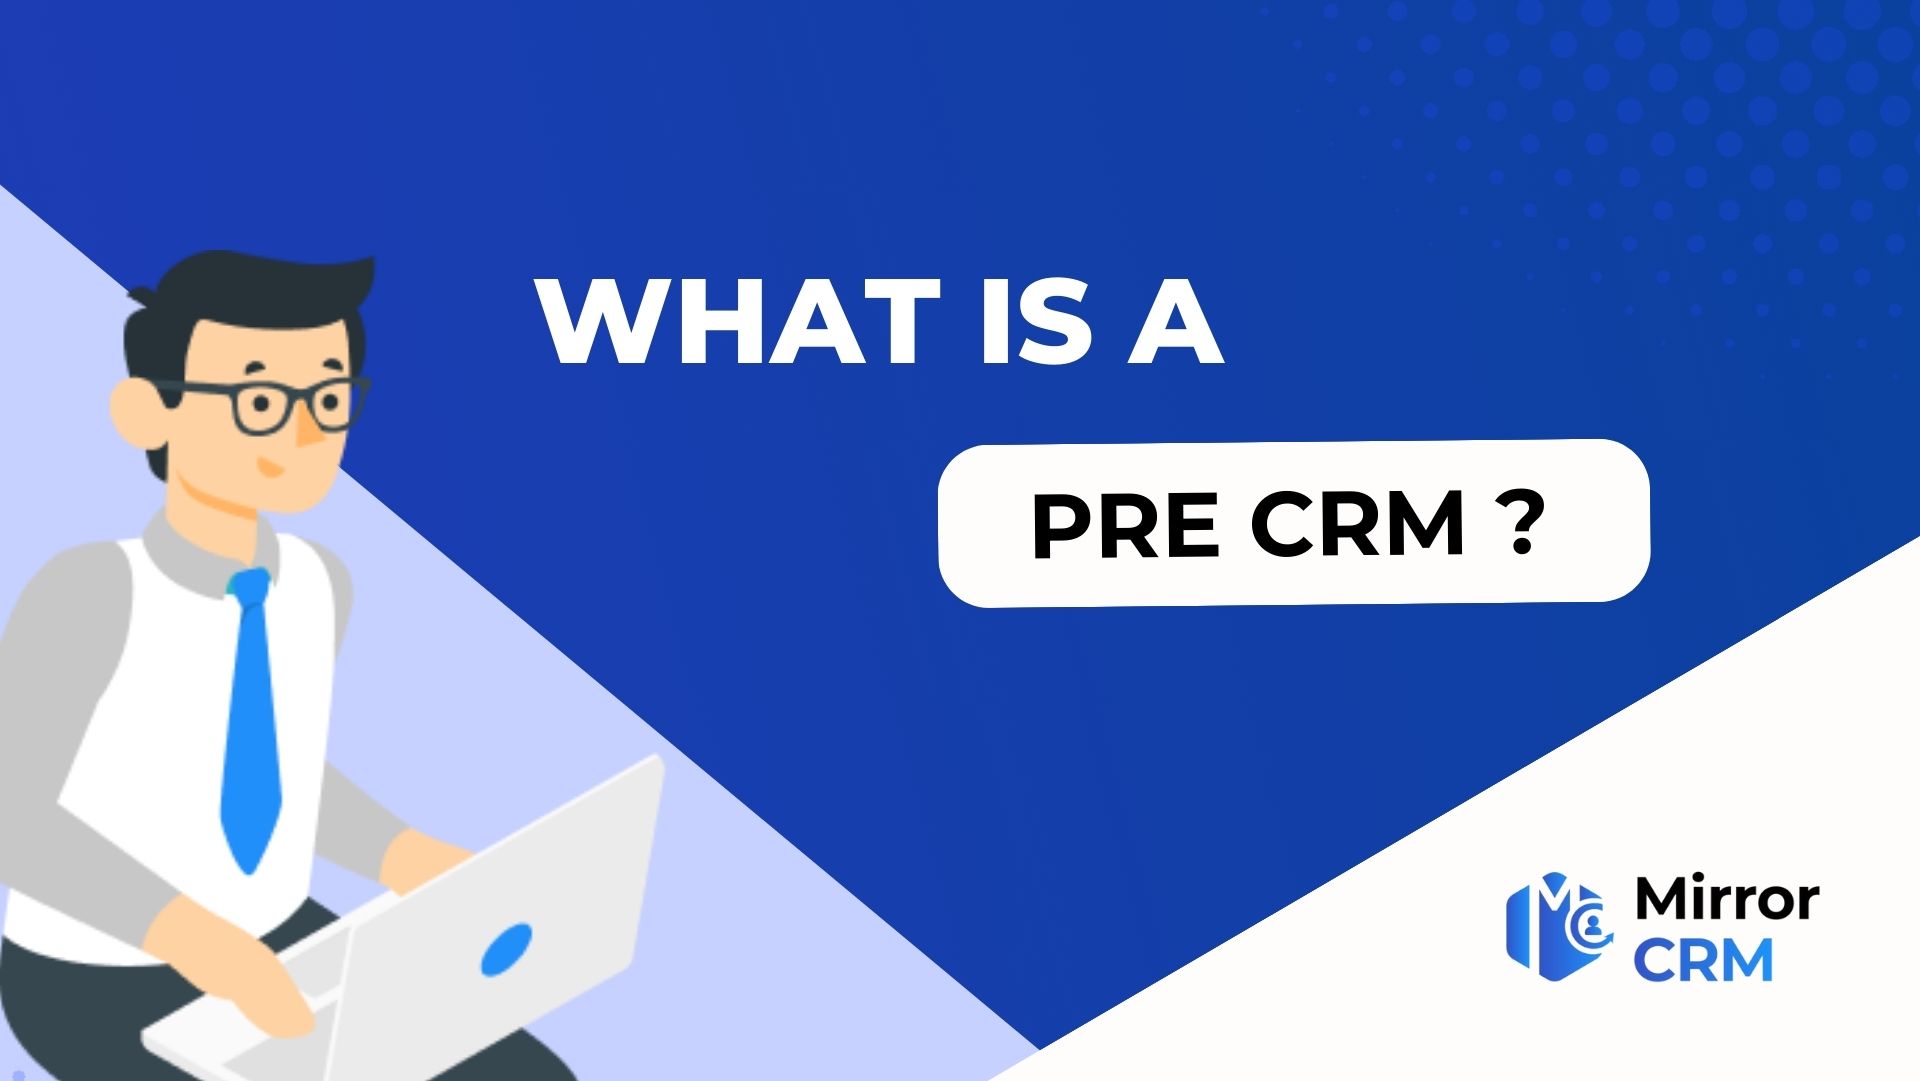 What is a pre crm ?